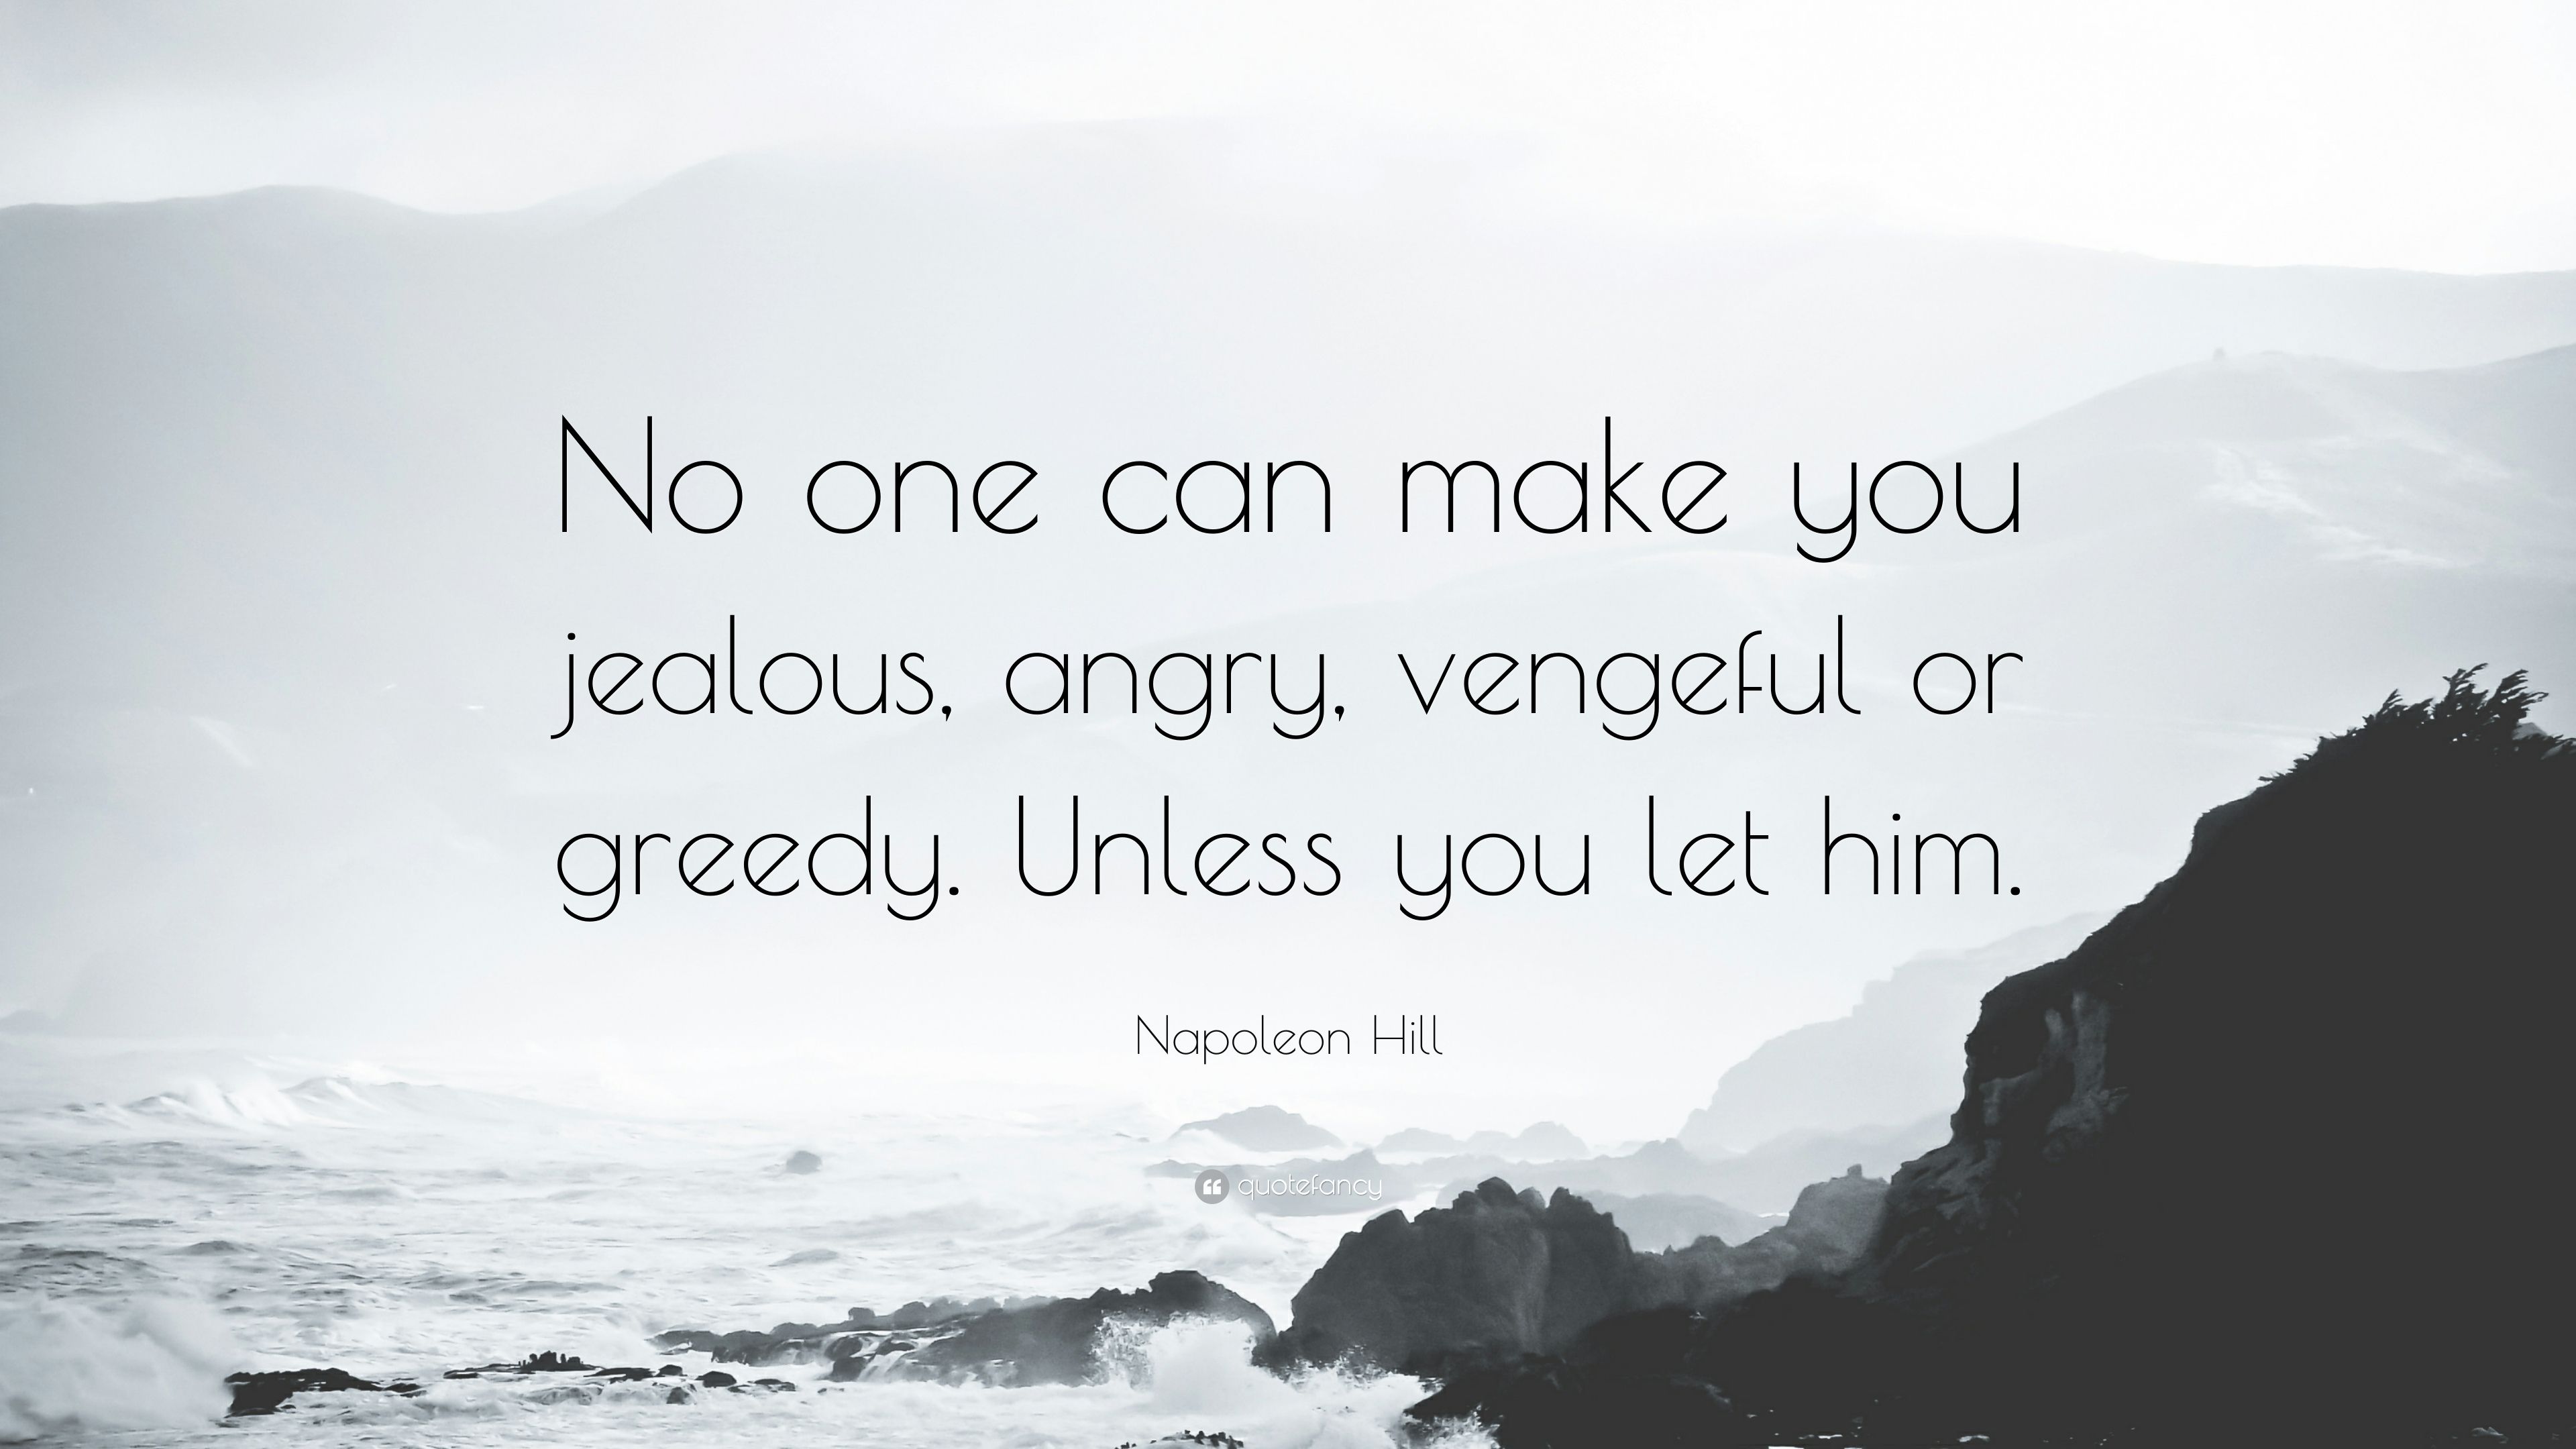 Napoleon Hill Quote: “No one can make you jealous, angry, vengeful